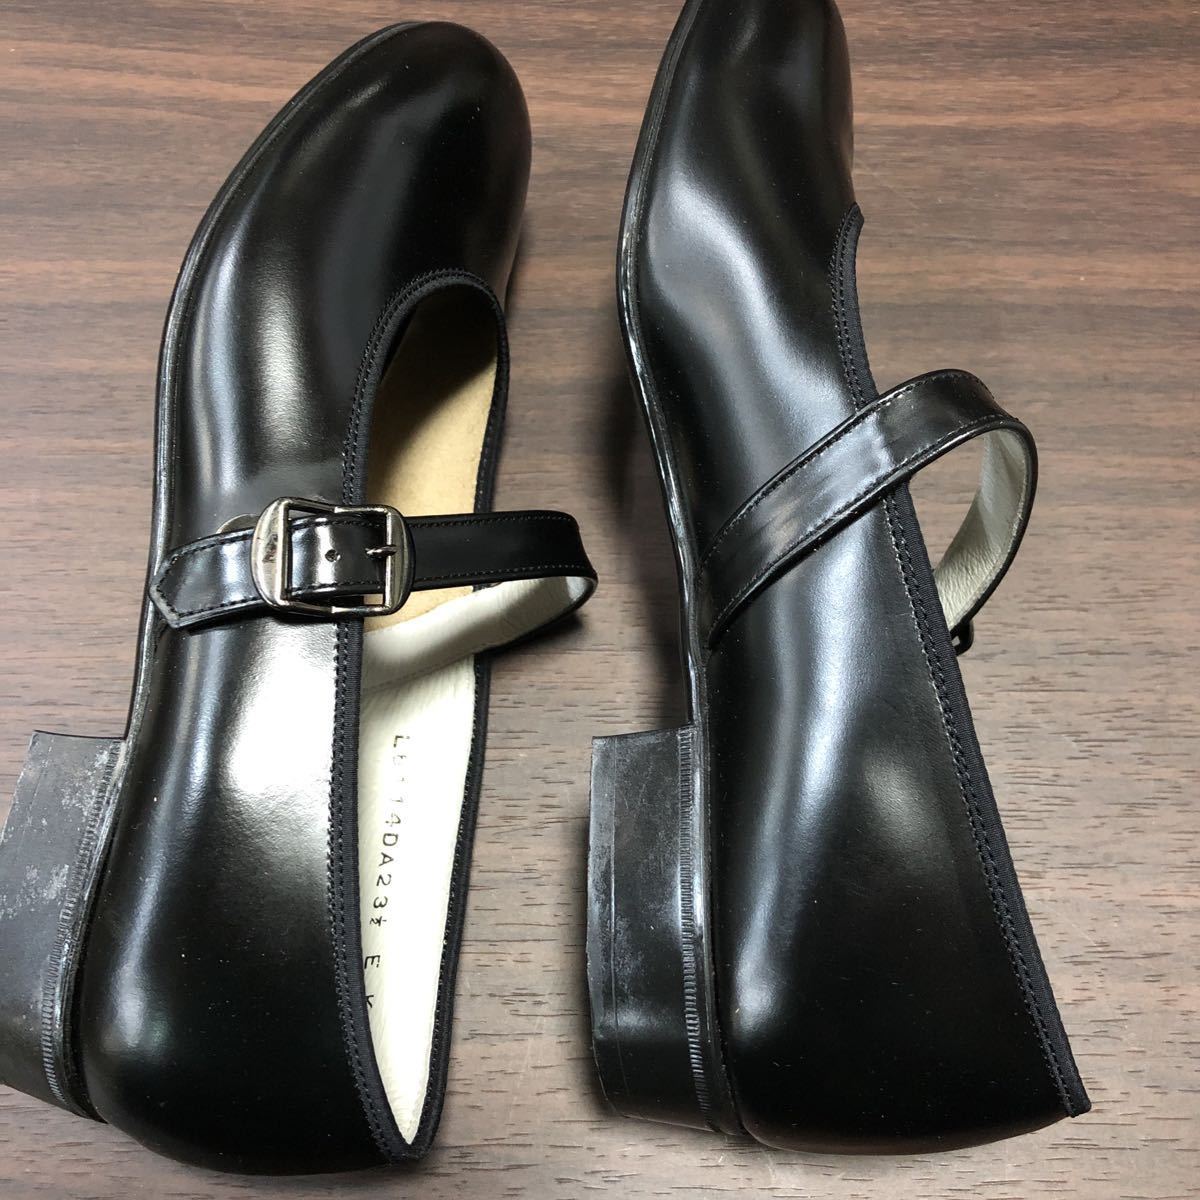  woman student leather shoes real leather 23.5cm 5800 jpy. goods .3 pair .7000 jpy . Asahi product 